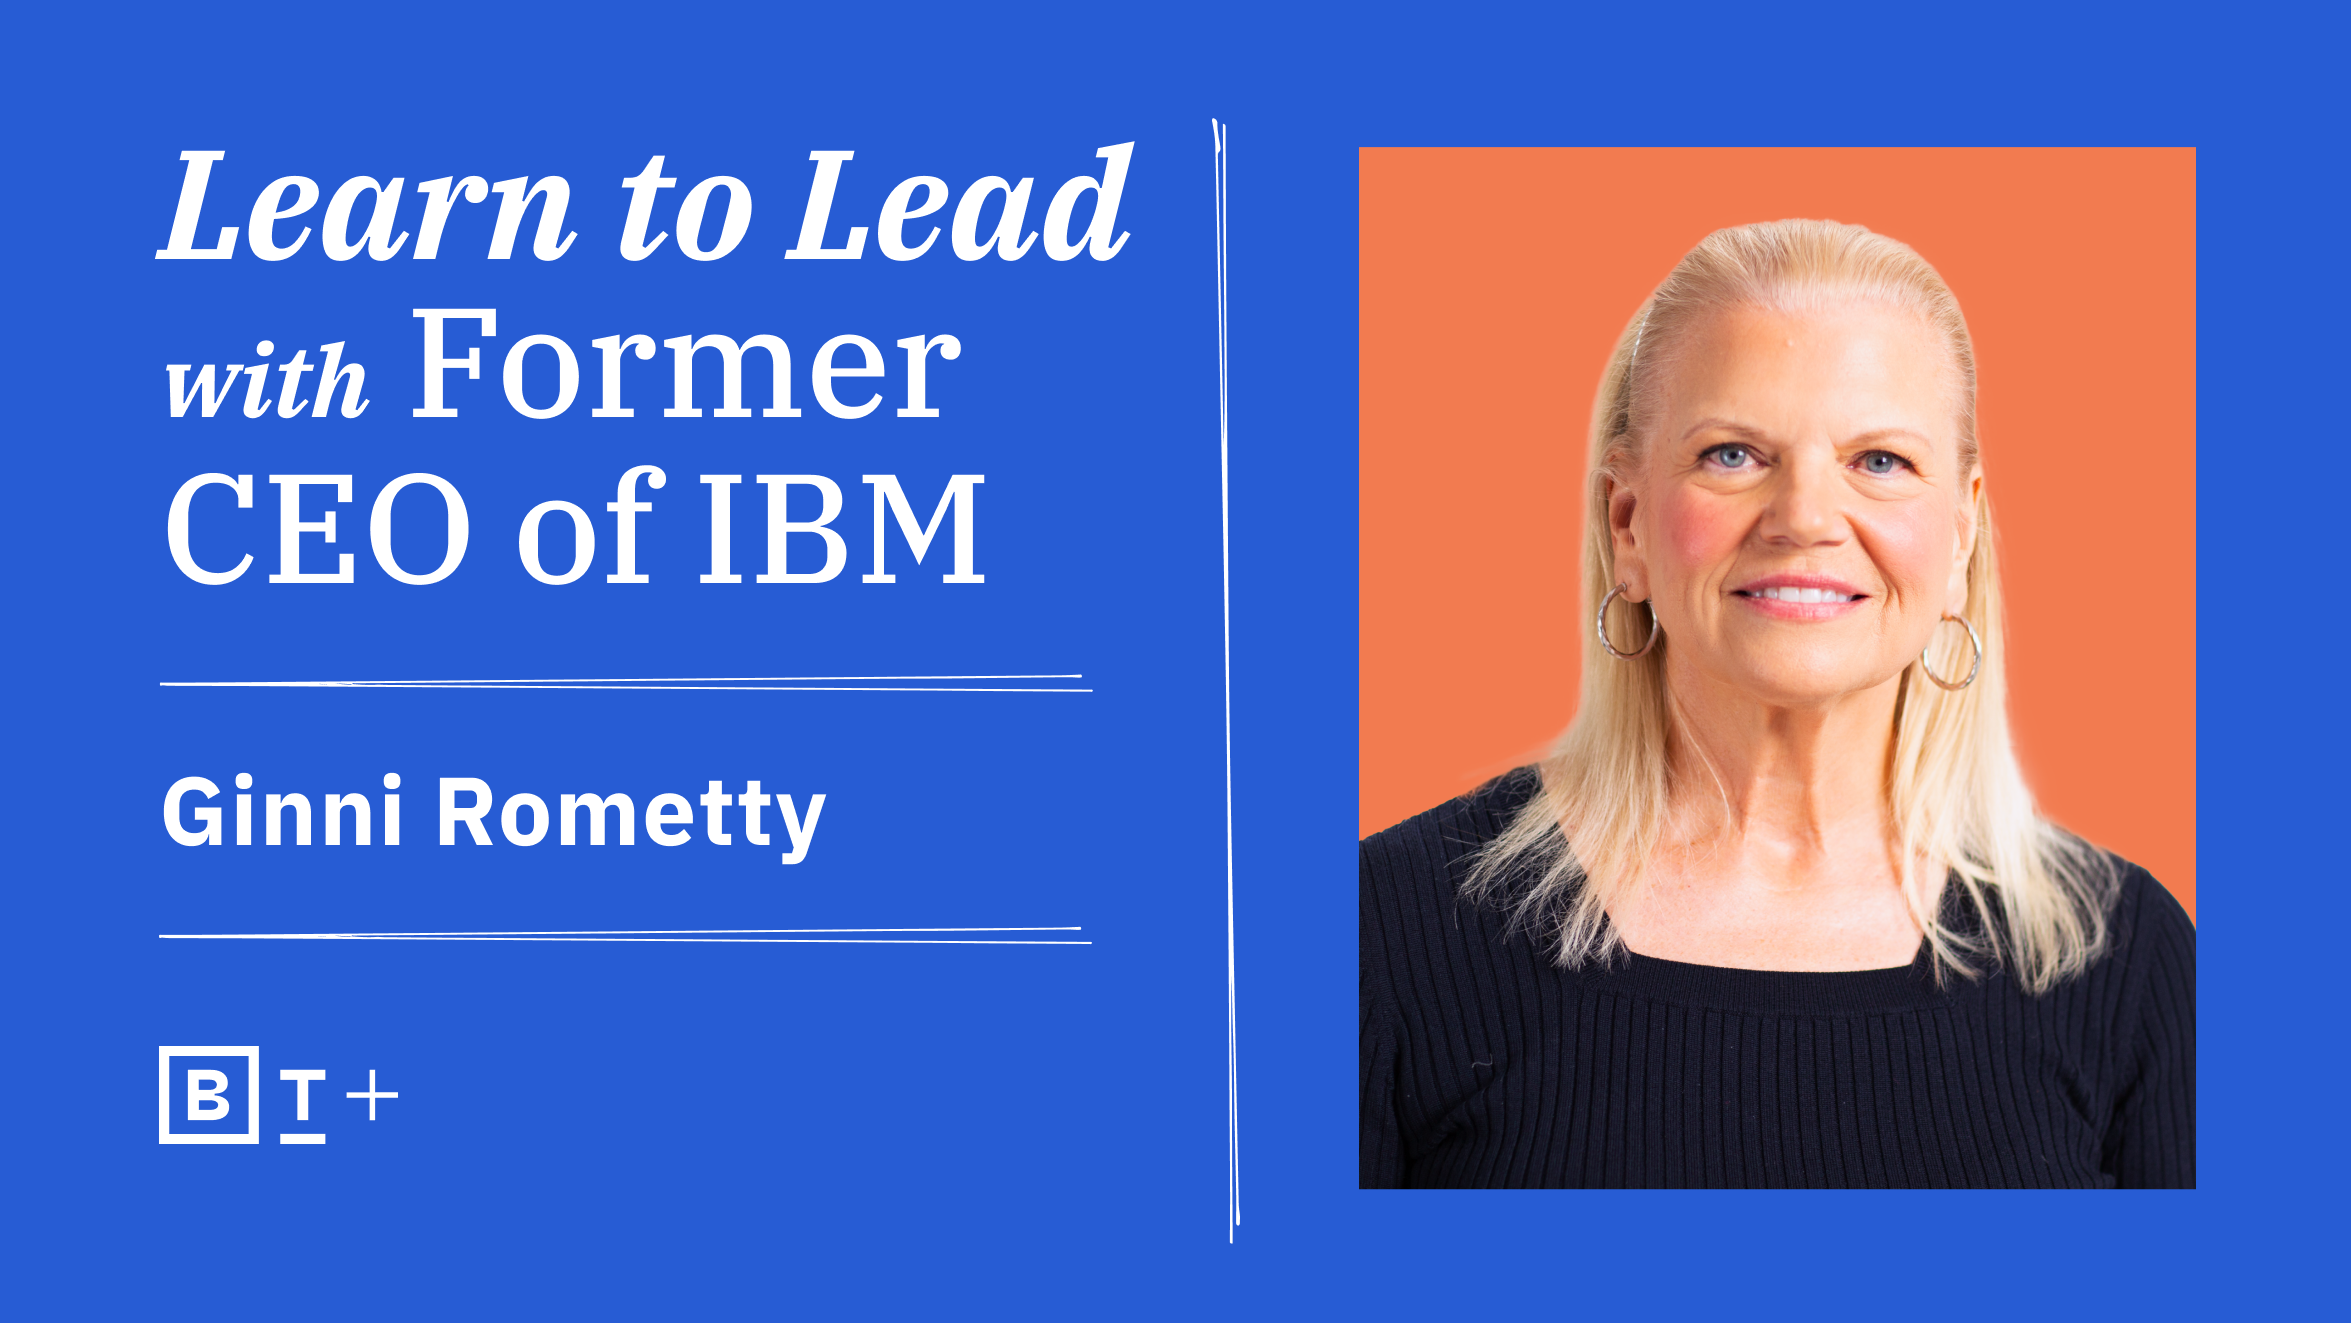 Learn to lead with former ceo of ibm.